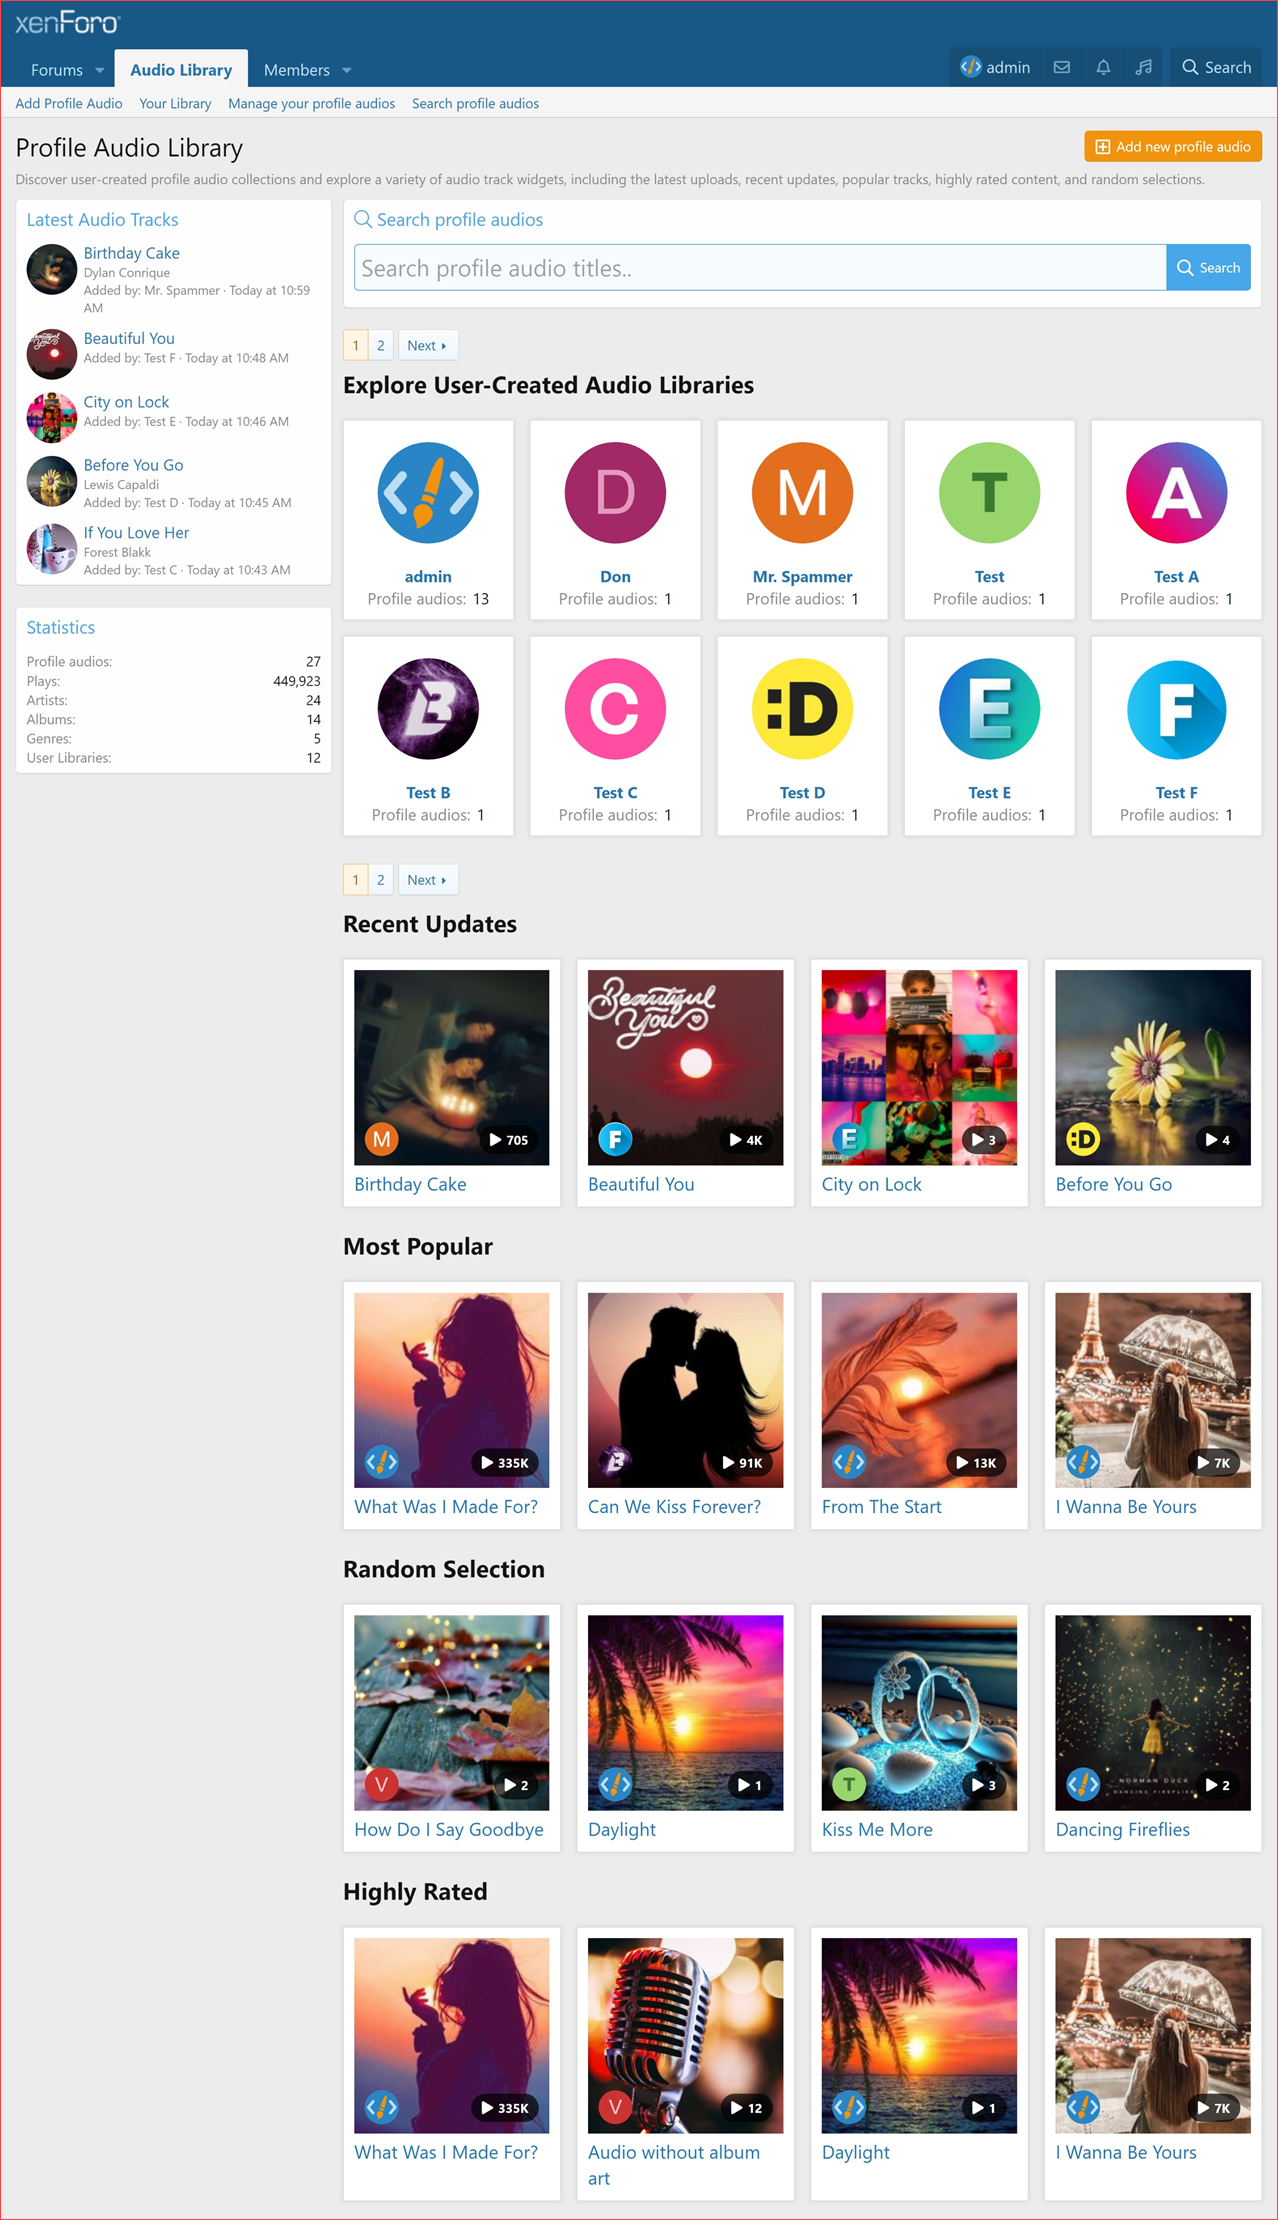 Profile-Audio-Library-Index-Full.png